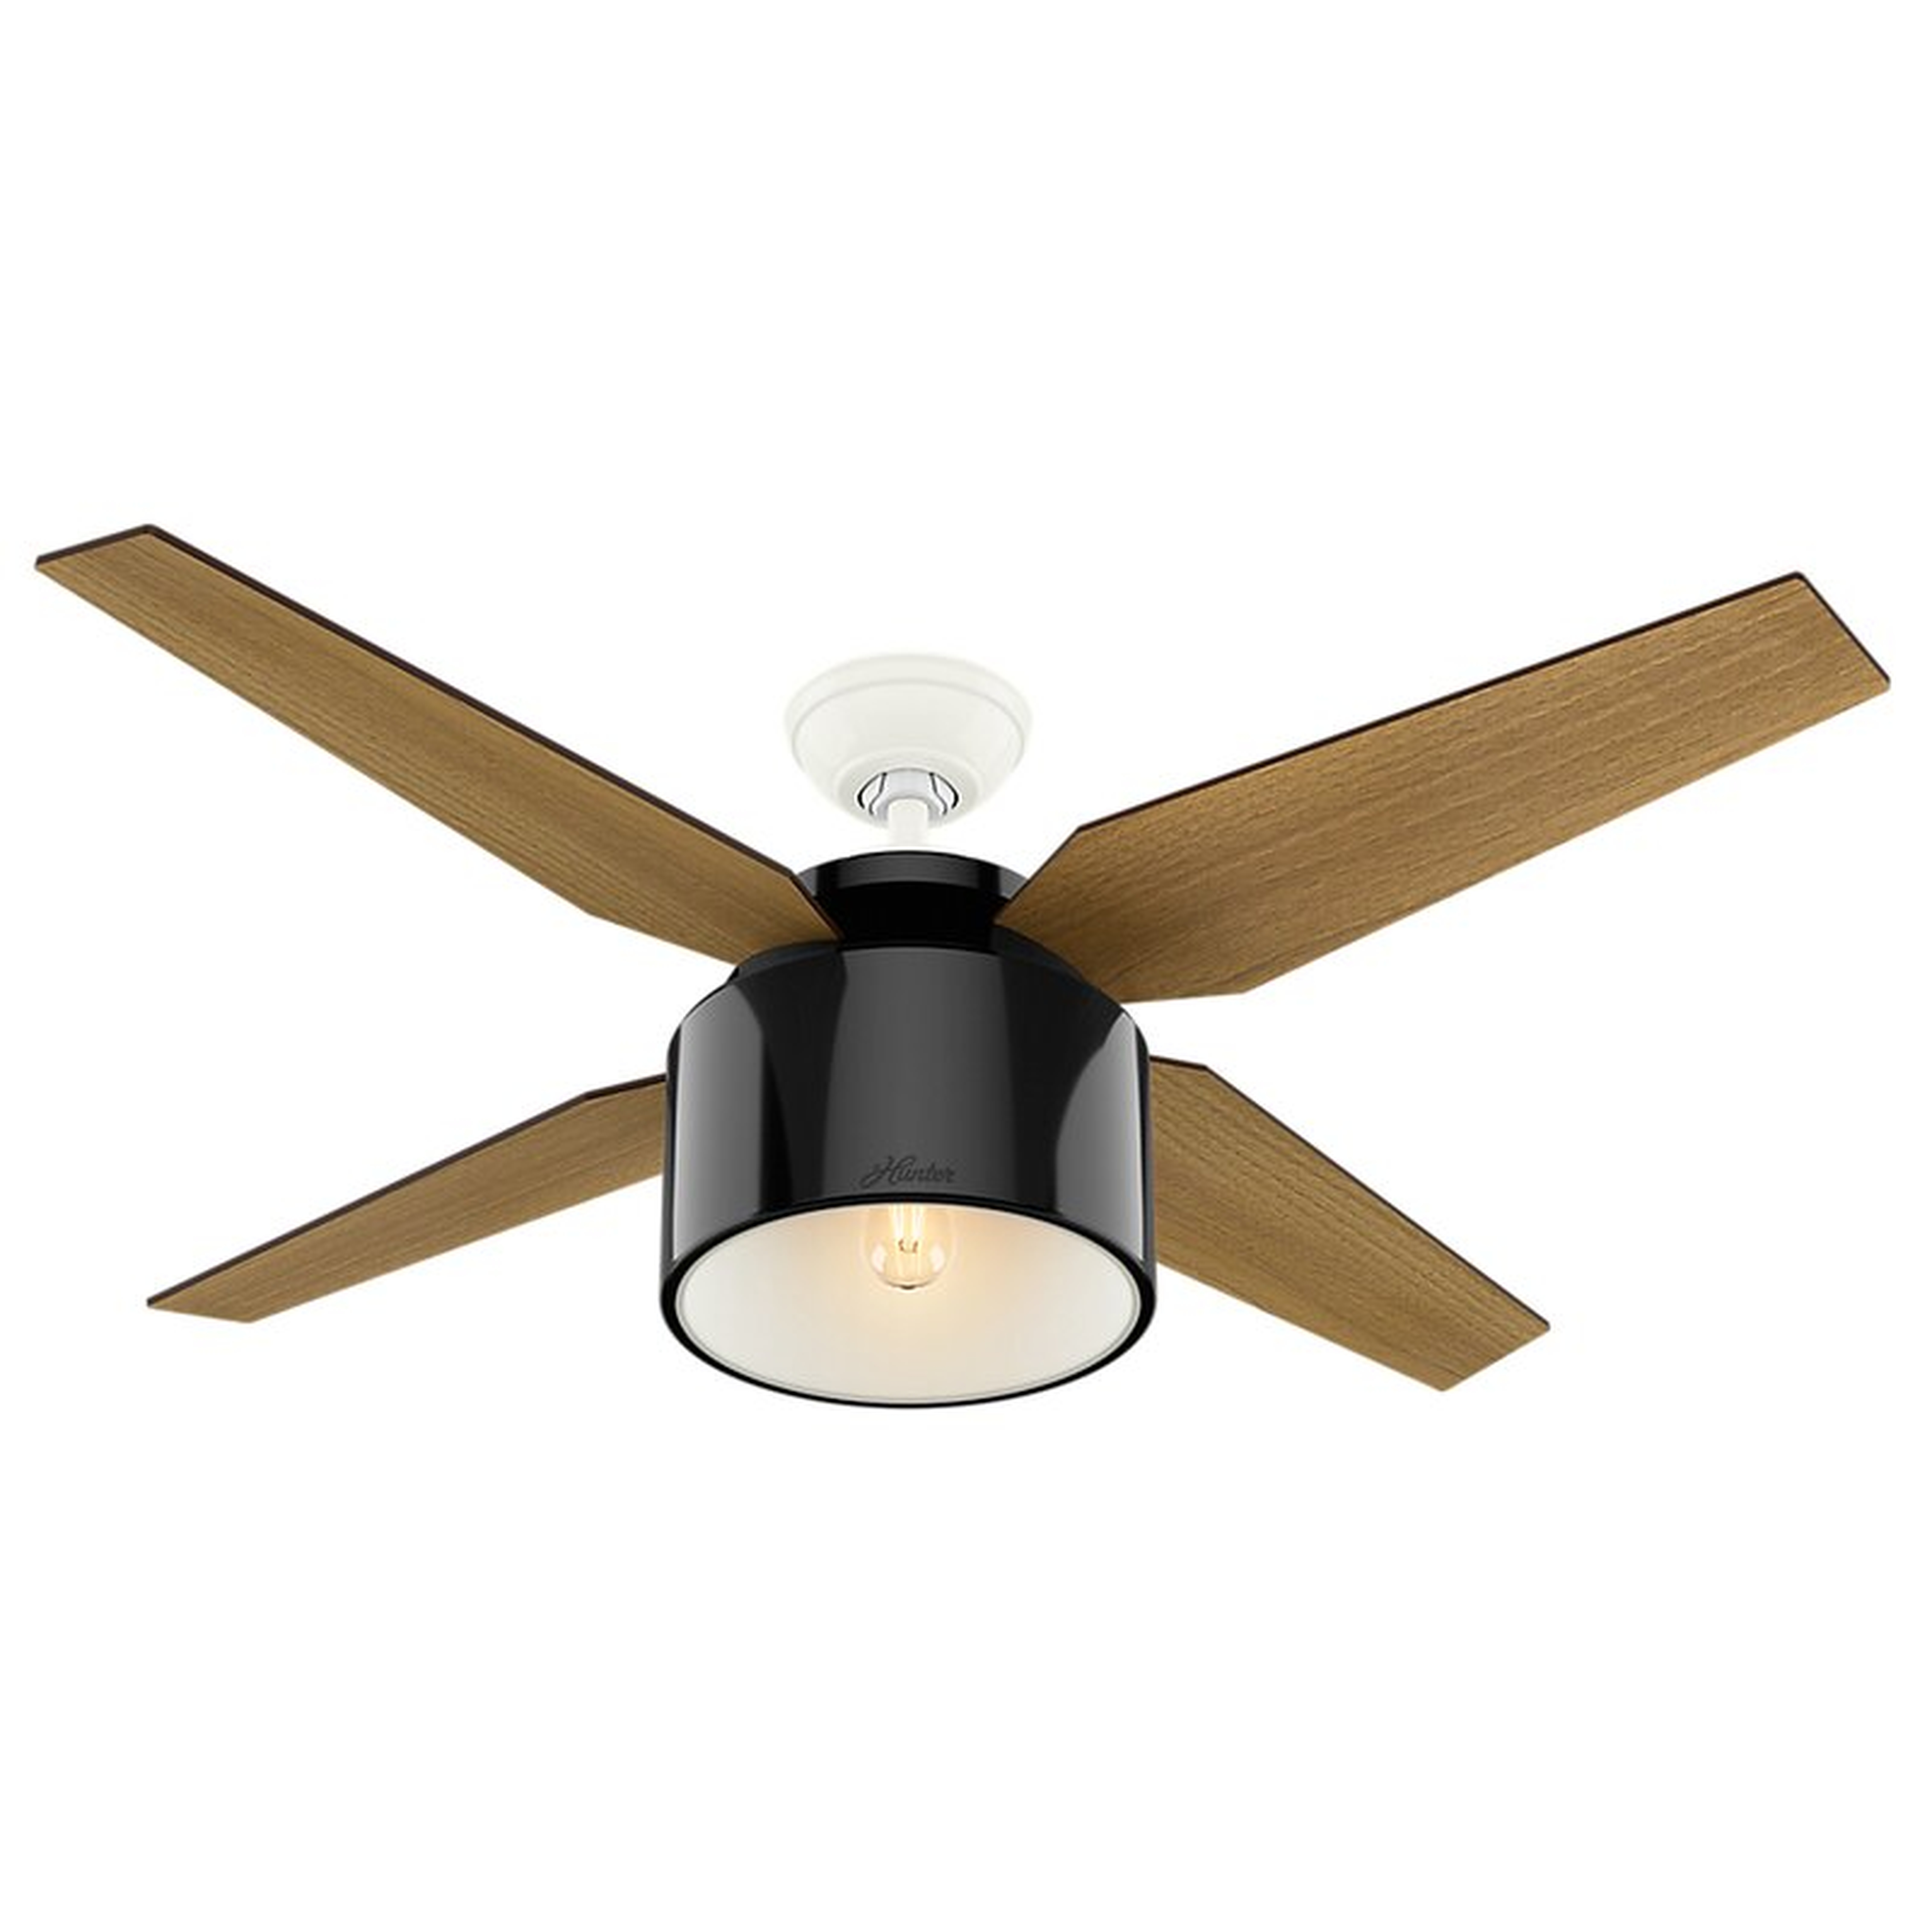 52" Cranbrook 4-Blade Ceiling Fan with Remote Light Kit Included - Wayfair